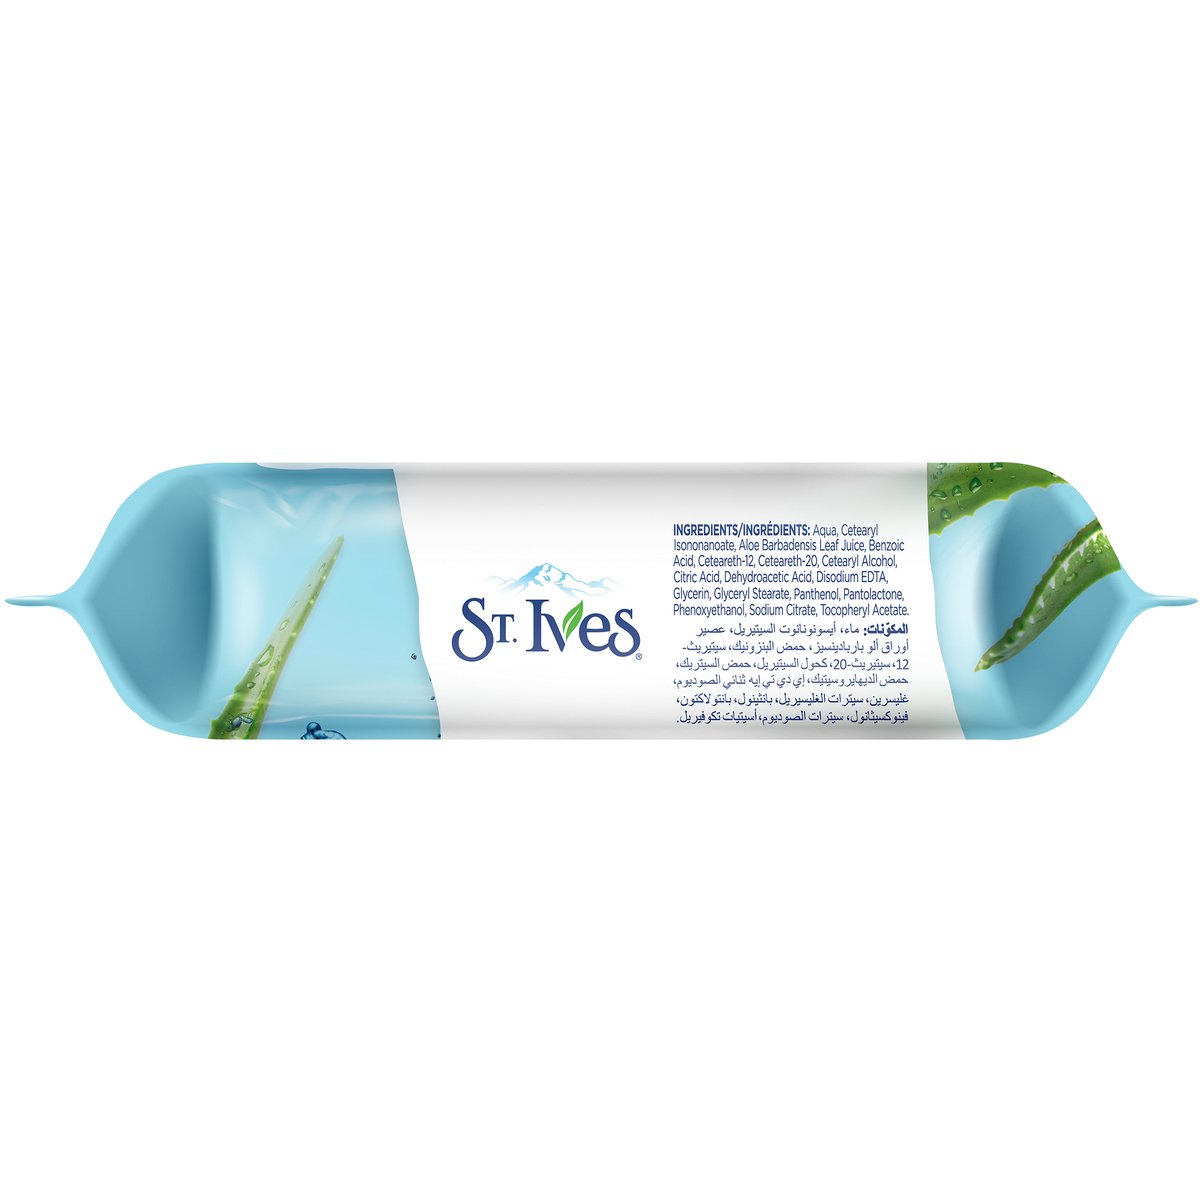 St. Ives Aloe Vera Hydrating Facial Cleansing Wipes 25 pcs